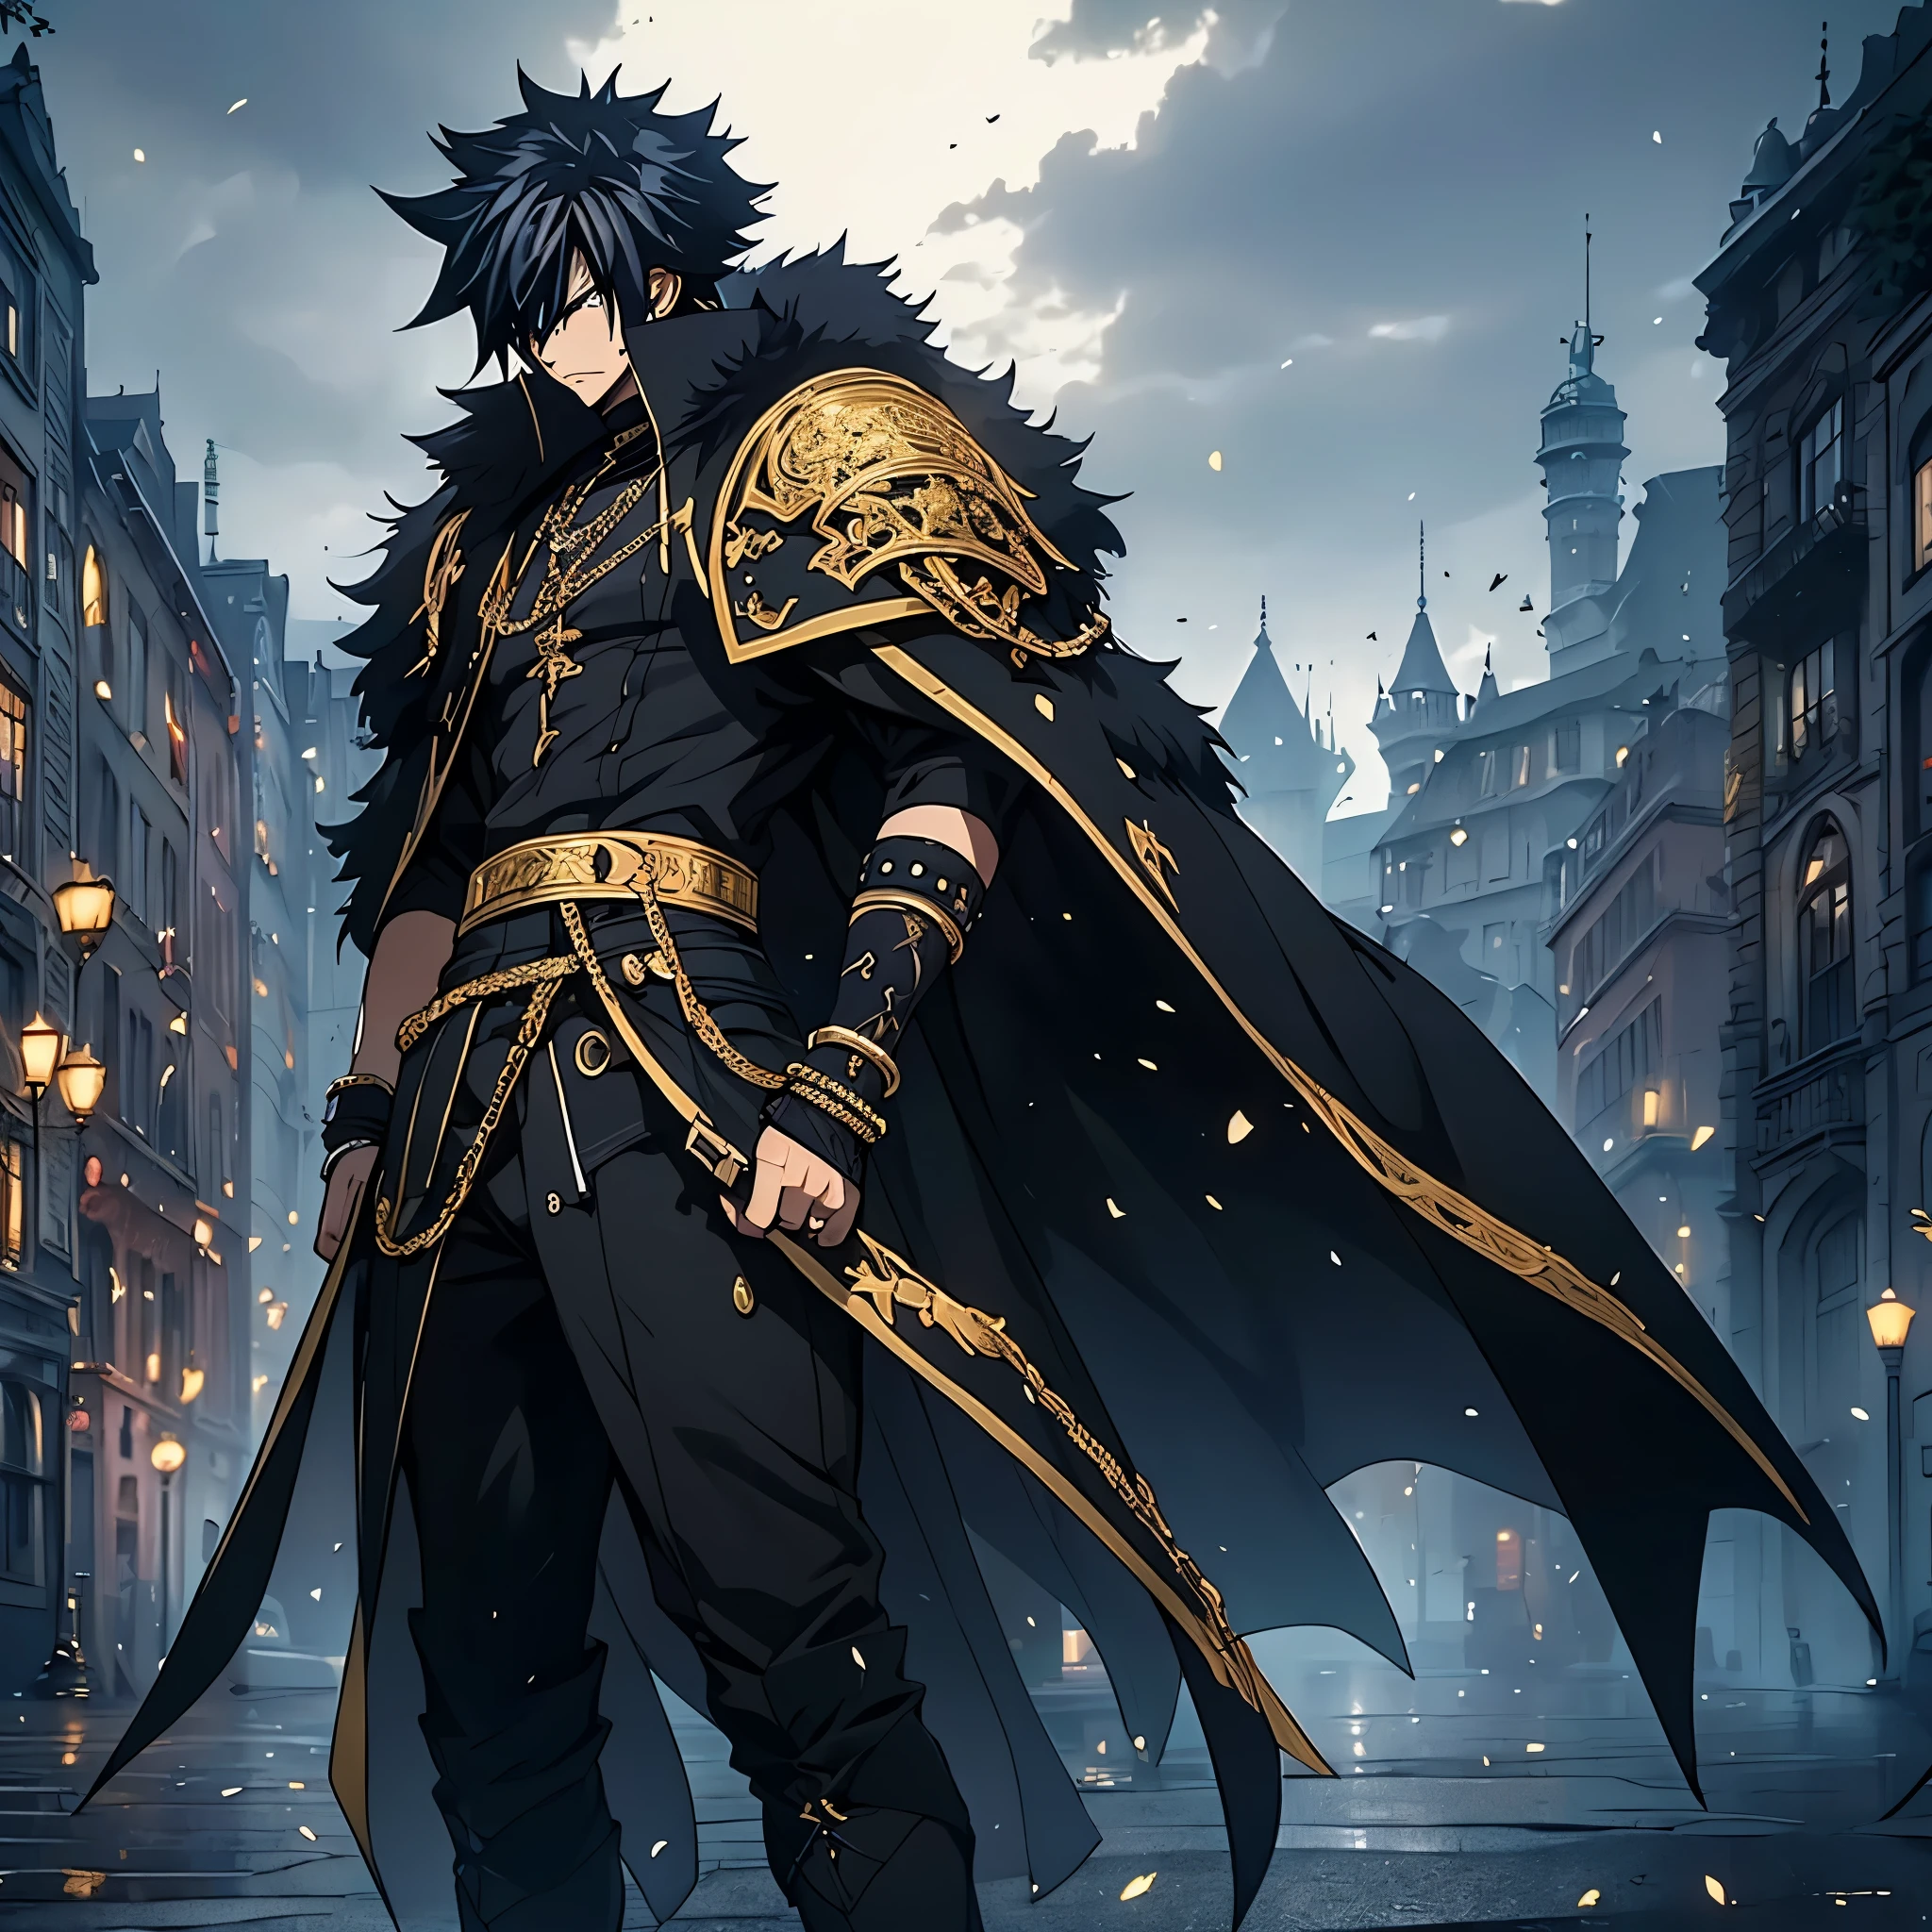 A (((powerful Gray Fullbuster))), clad in sleek, ((black military attire)) with intricate, ((gold accents)), sporting a classic Pickelhaube helmet and ((steel-toed black boots)), accessorizing with a ((sharp black metal bracelet)) and a luxurious (fur-trimmed cape) draped across his shoulders, exuding a serious demeanor as he strolls through a quaint, (Germanic town).(solo man)
